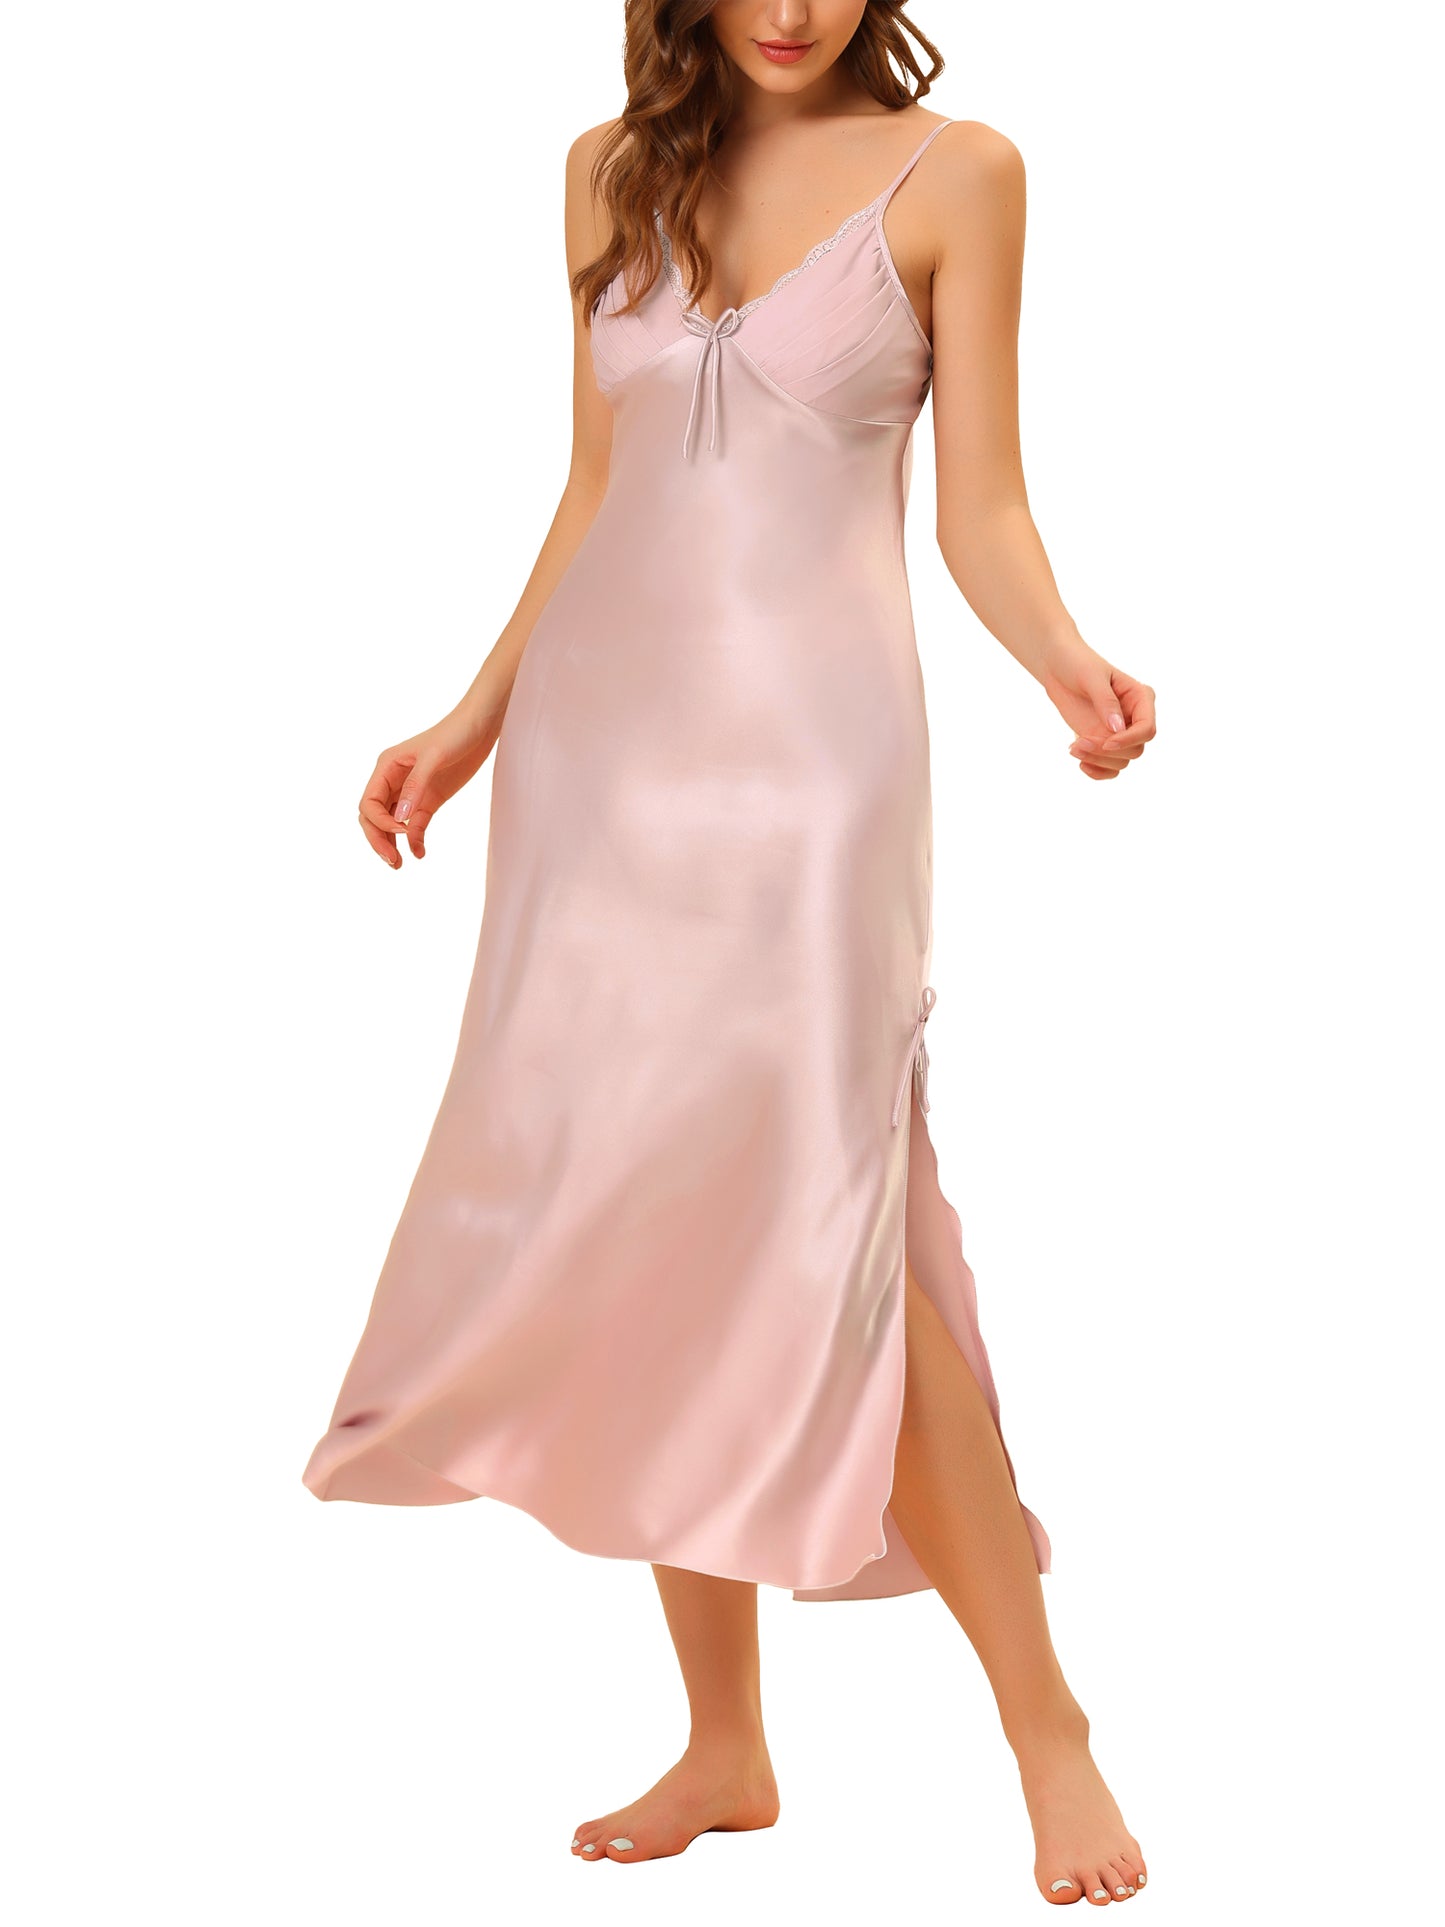 cheibear Satin Slip Dress Chemise Silky Lounge Camisole Maxi Nightgowns Light Pink